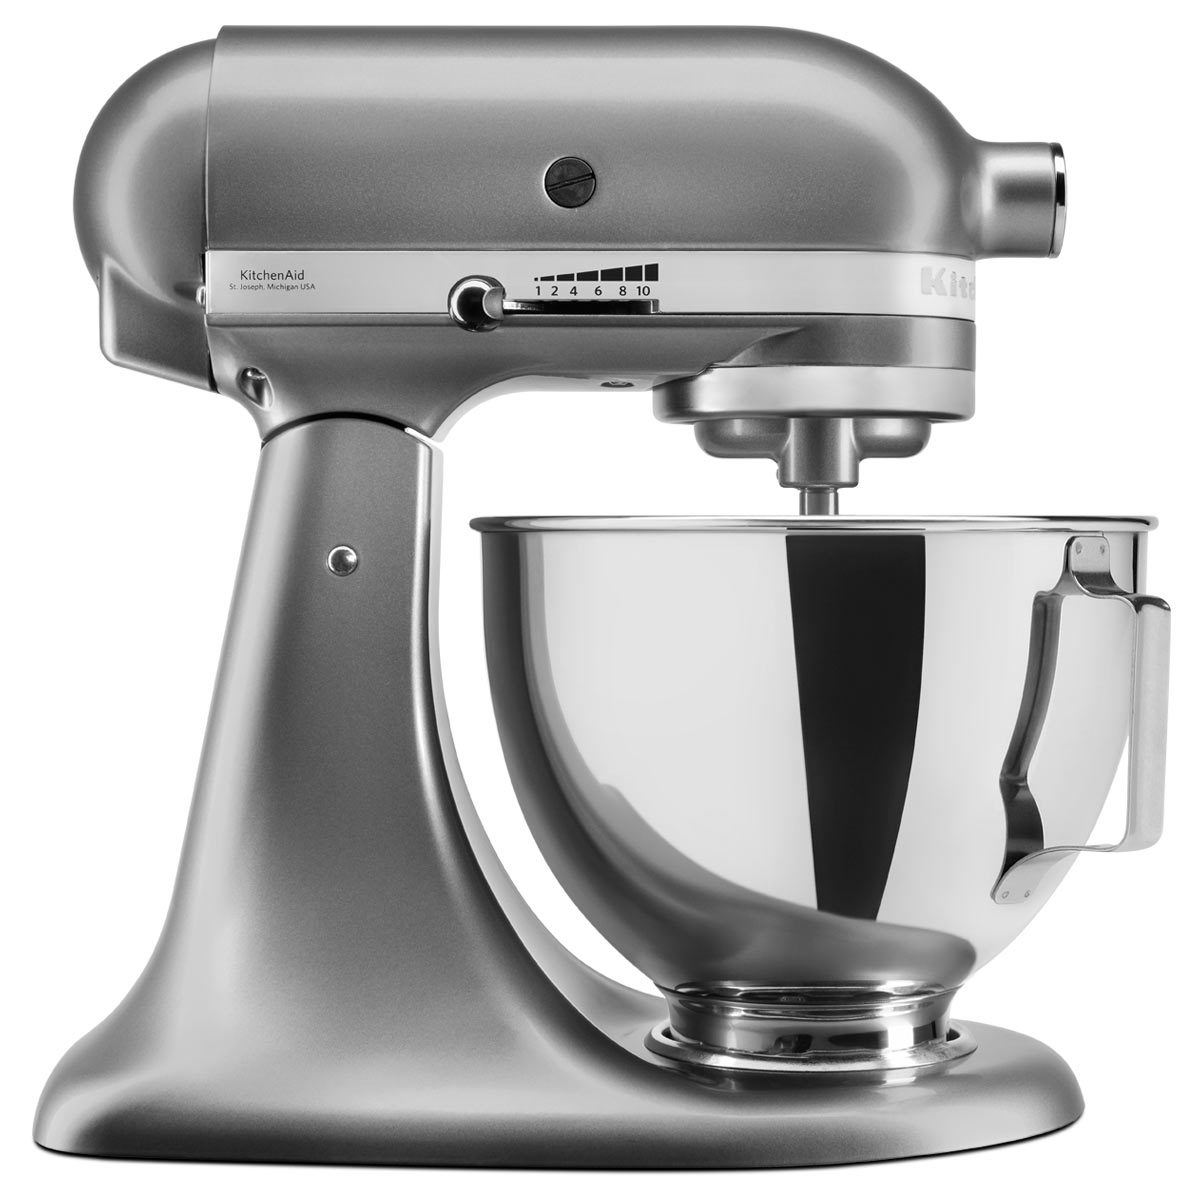 Kitchenaid 43l Stand Mixer With Pouring Shield In Silver 5ksm95psbcu Costco Uk